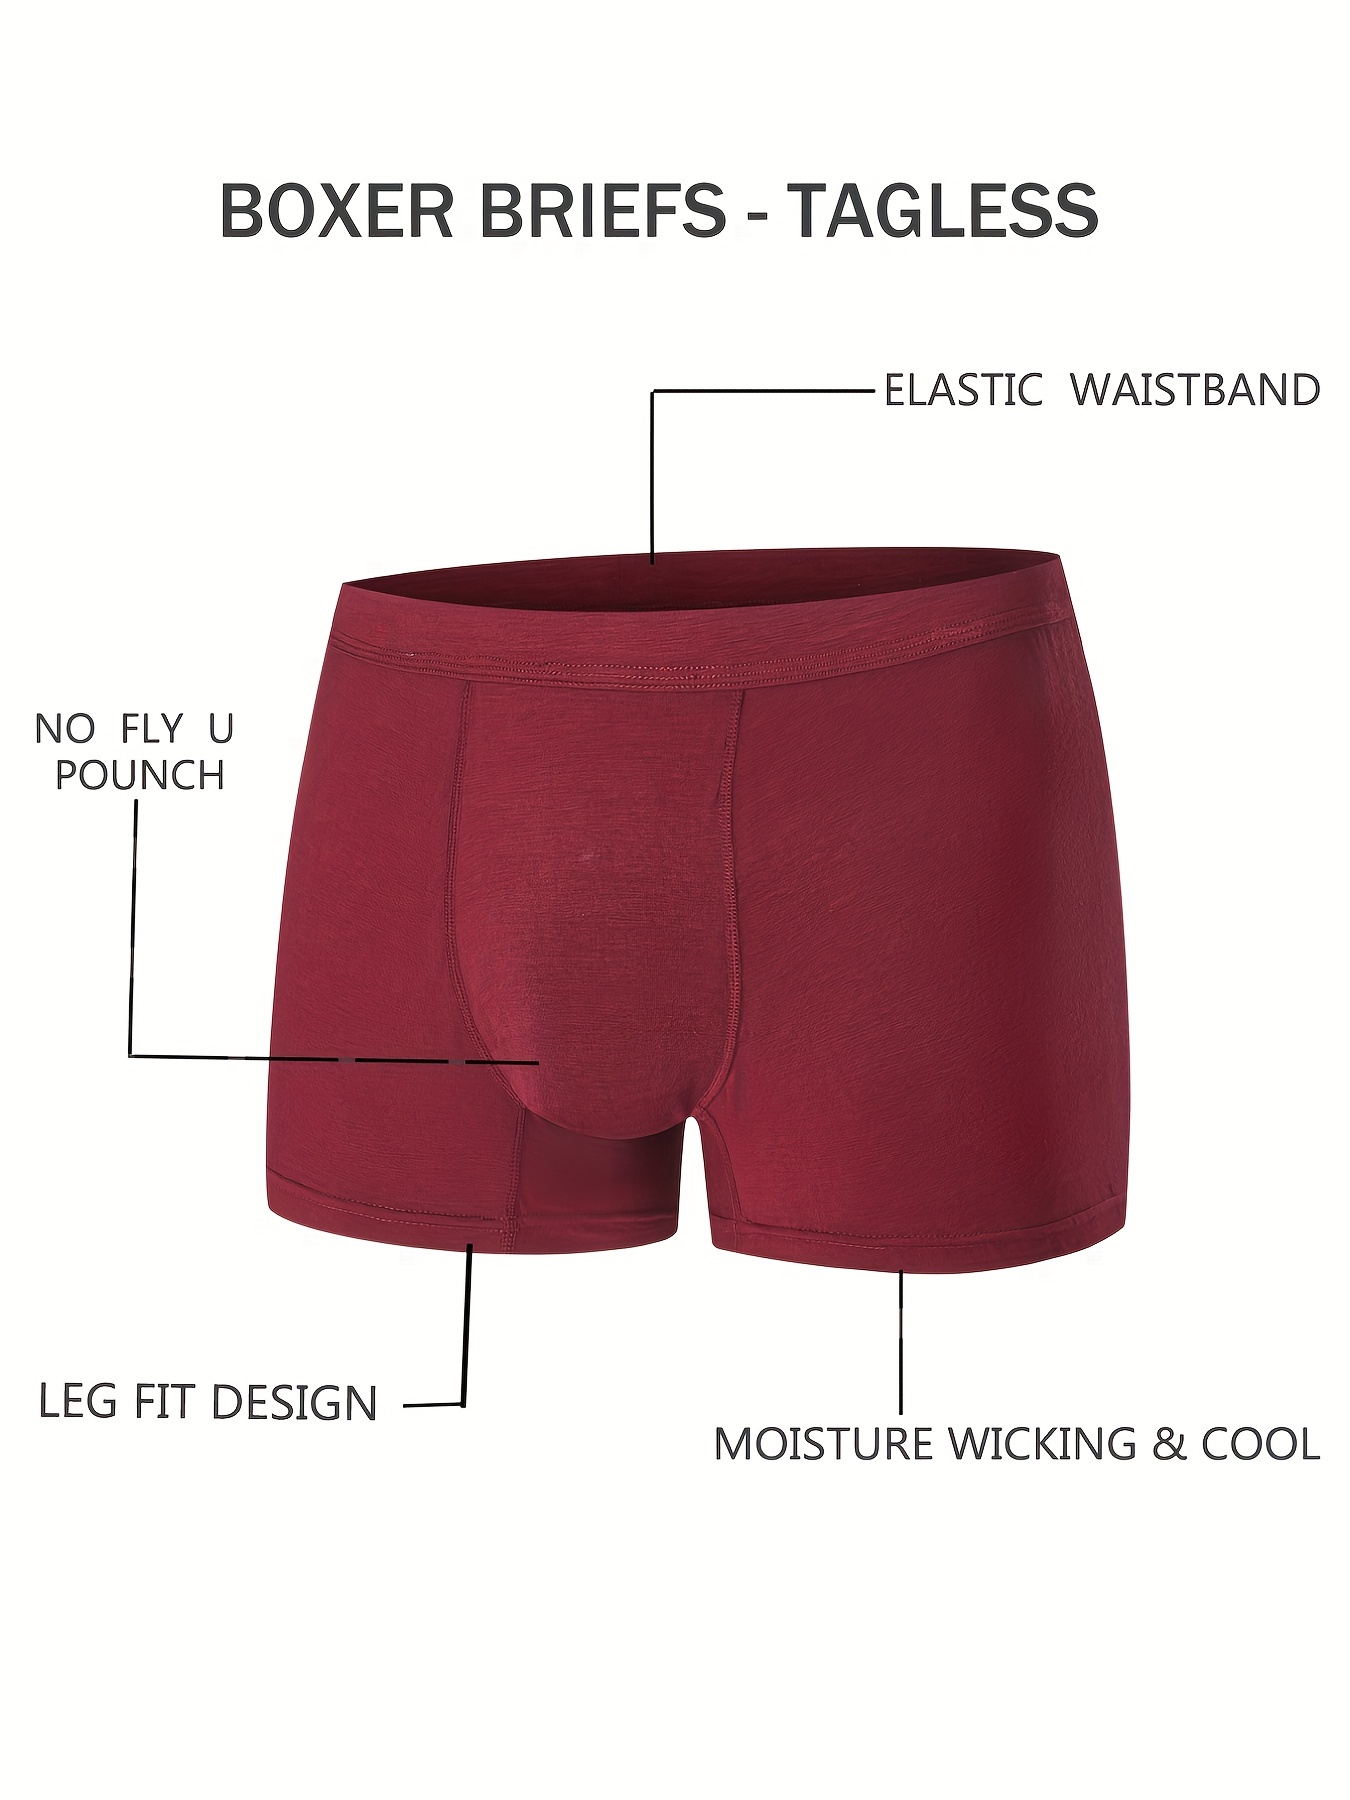 Premium Photo  Breathable and moisturewicking performance boxer briefs  designed to keep you cool and dry during active pursuits while offering  optimal support Generated by AI